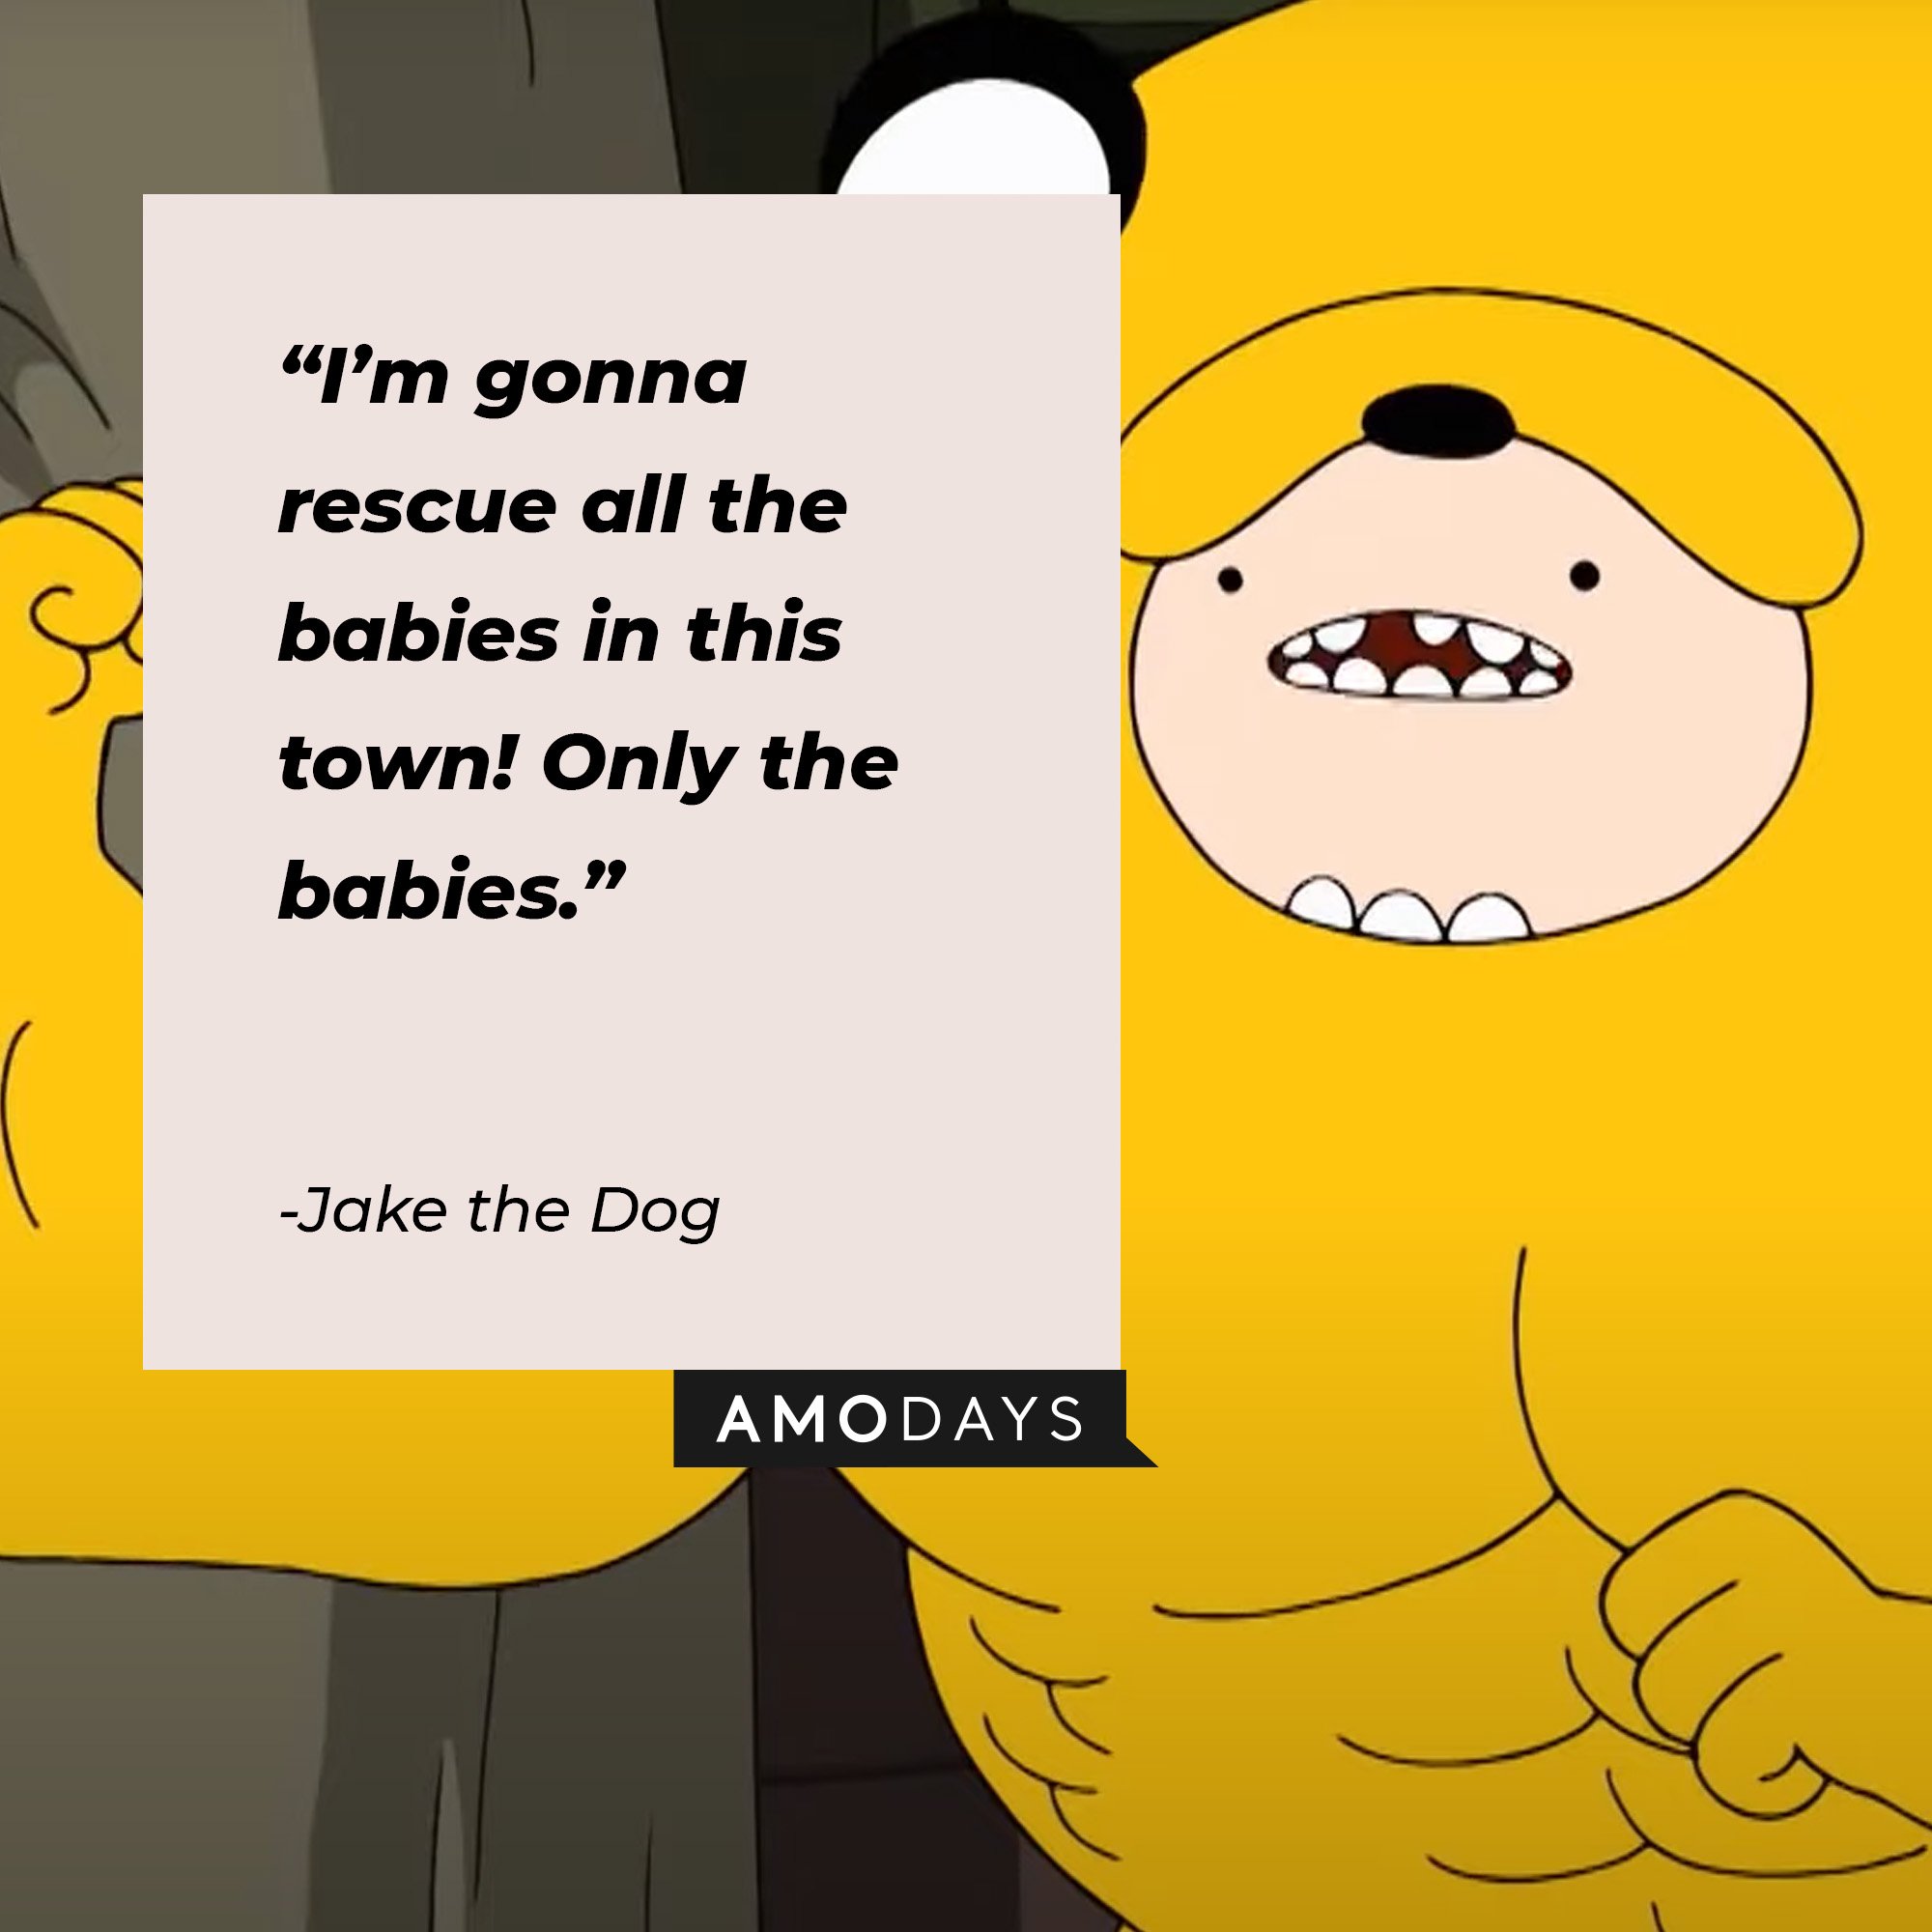    Jake the Dog’s quote: “I’m gonna rescue all the babies in this town! Only the babies.”  |  Image: AmoDays